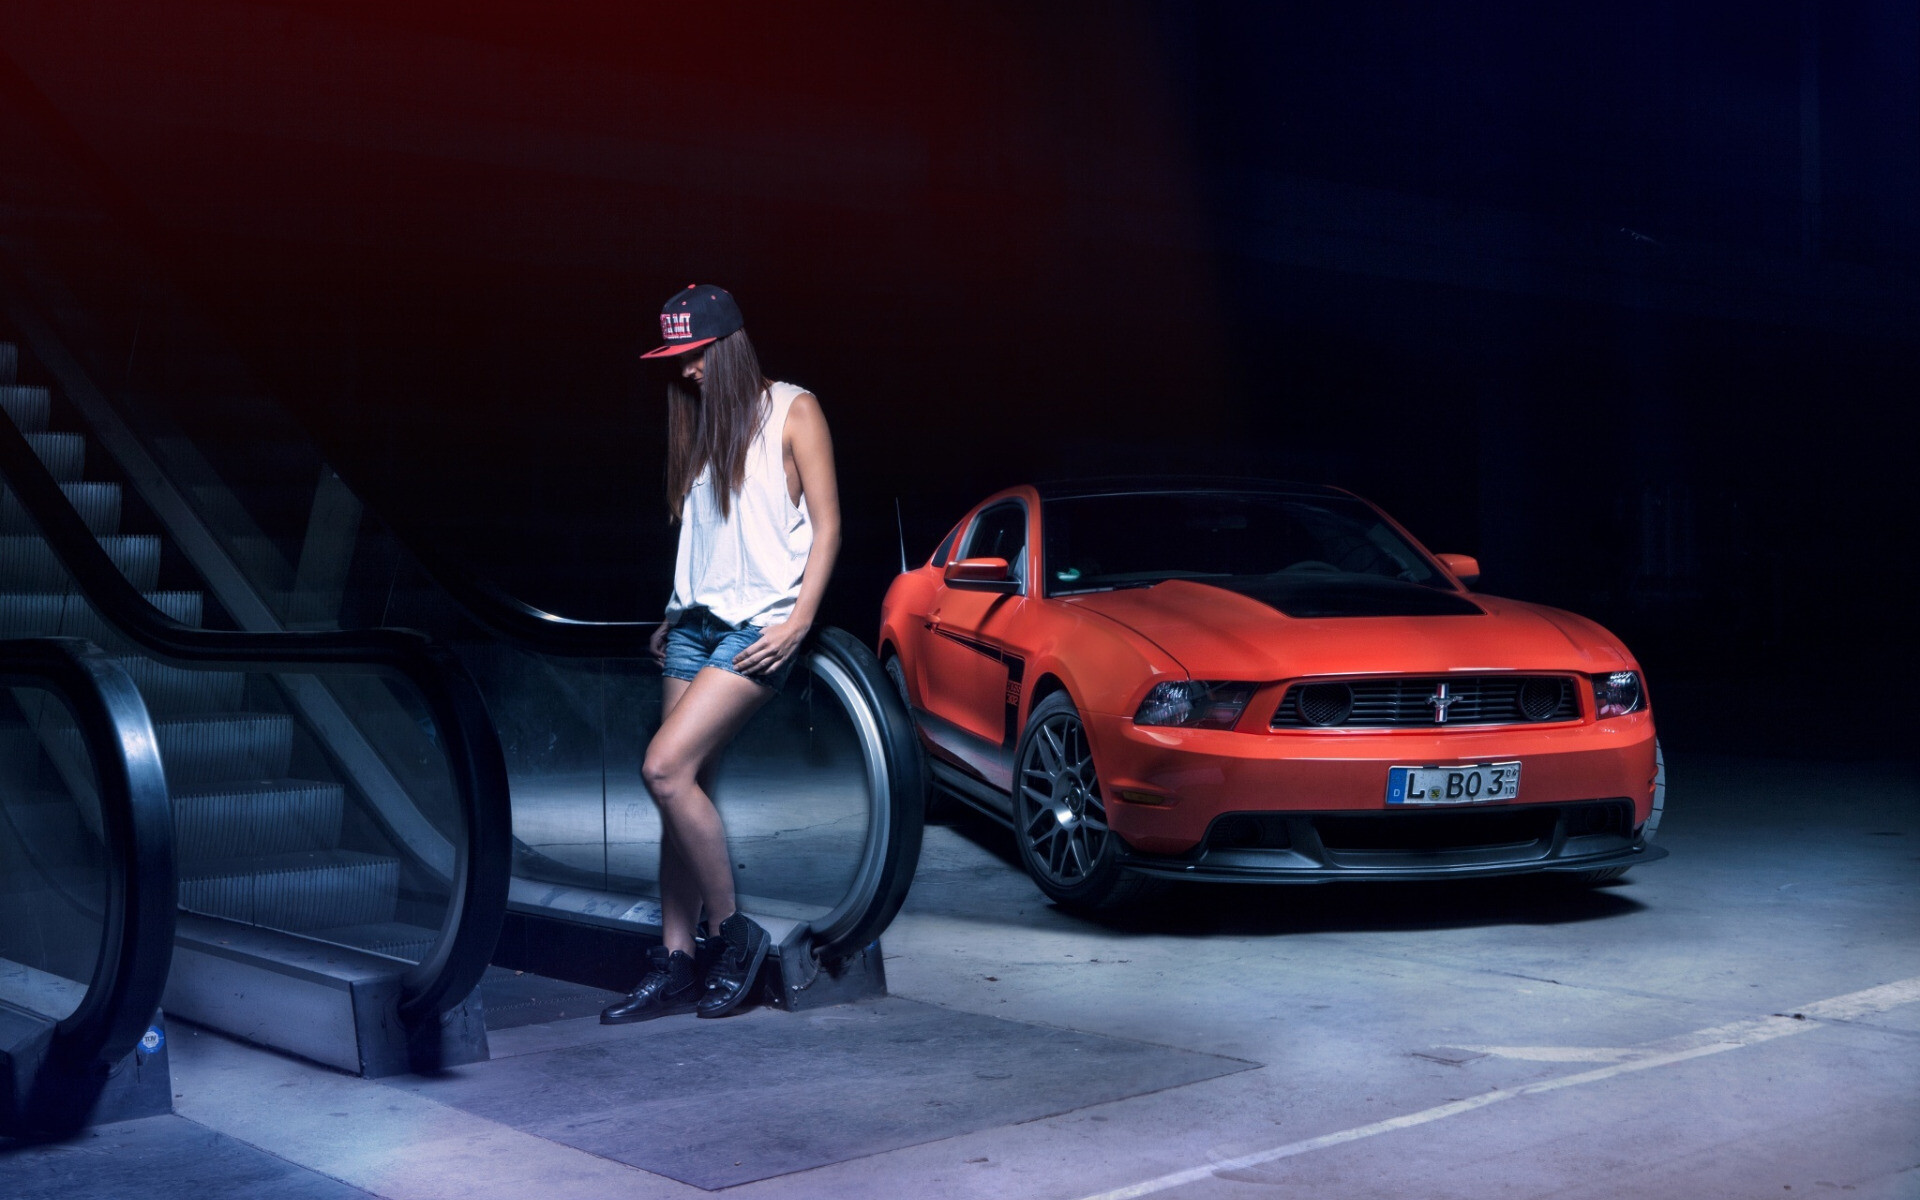 Girls and Muscle Cars: The Mustang Boss 302, A high-performance variant of the Ford Mustang, Elevator. 1920x1200 HD Wallpaper.